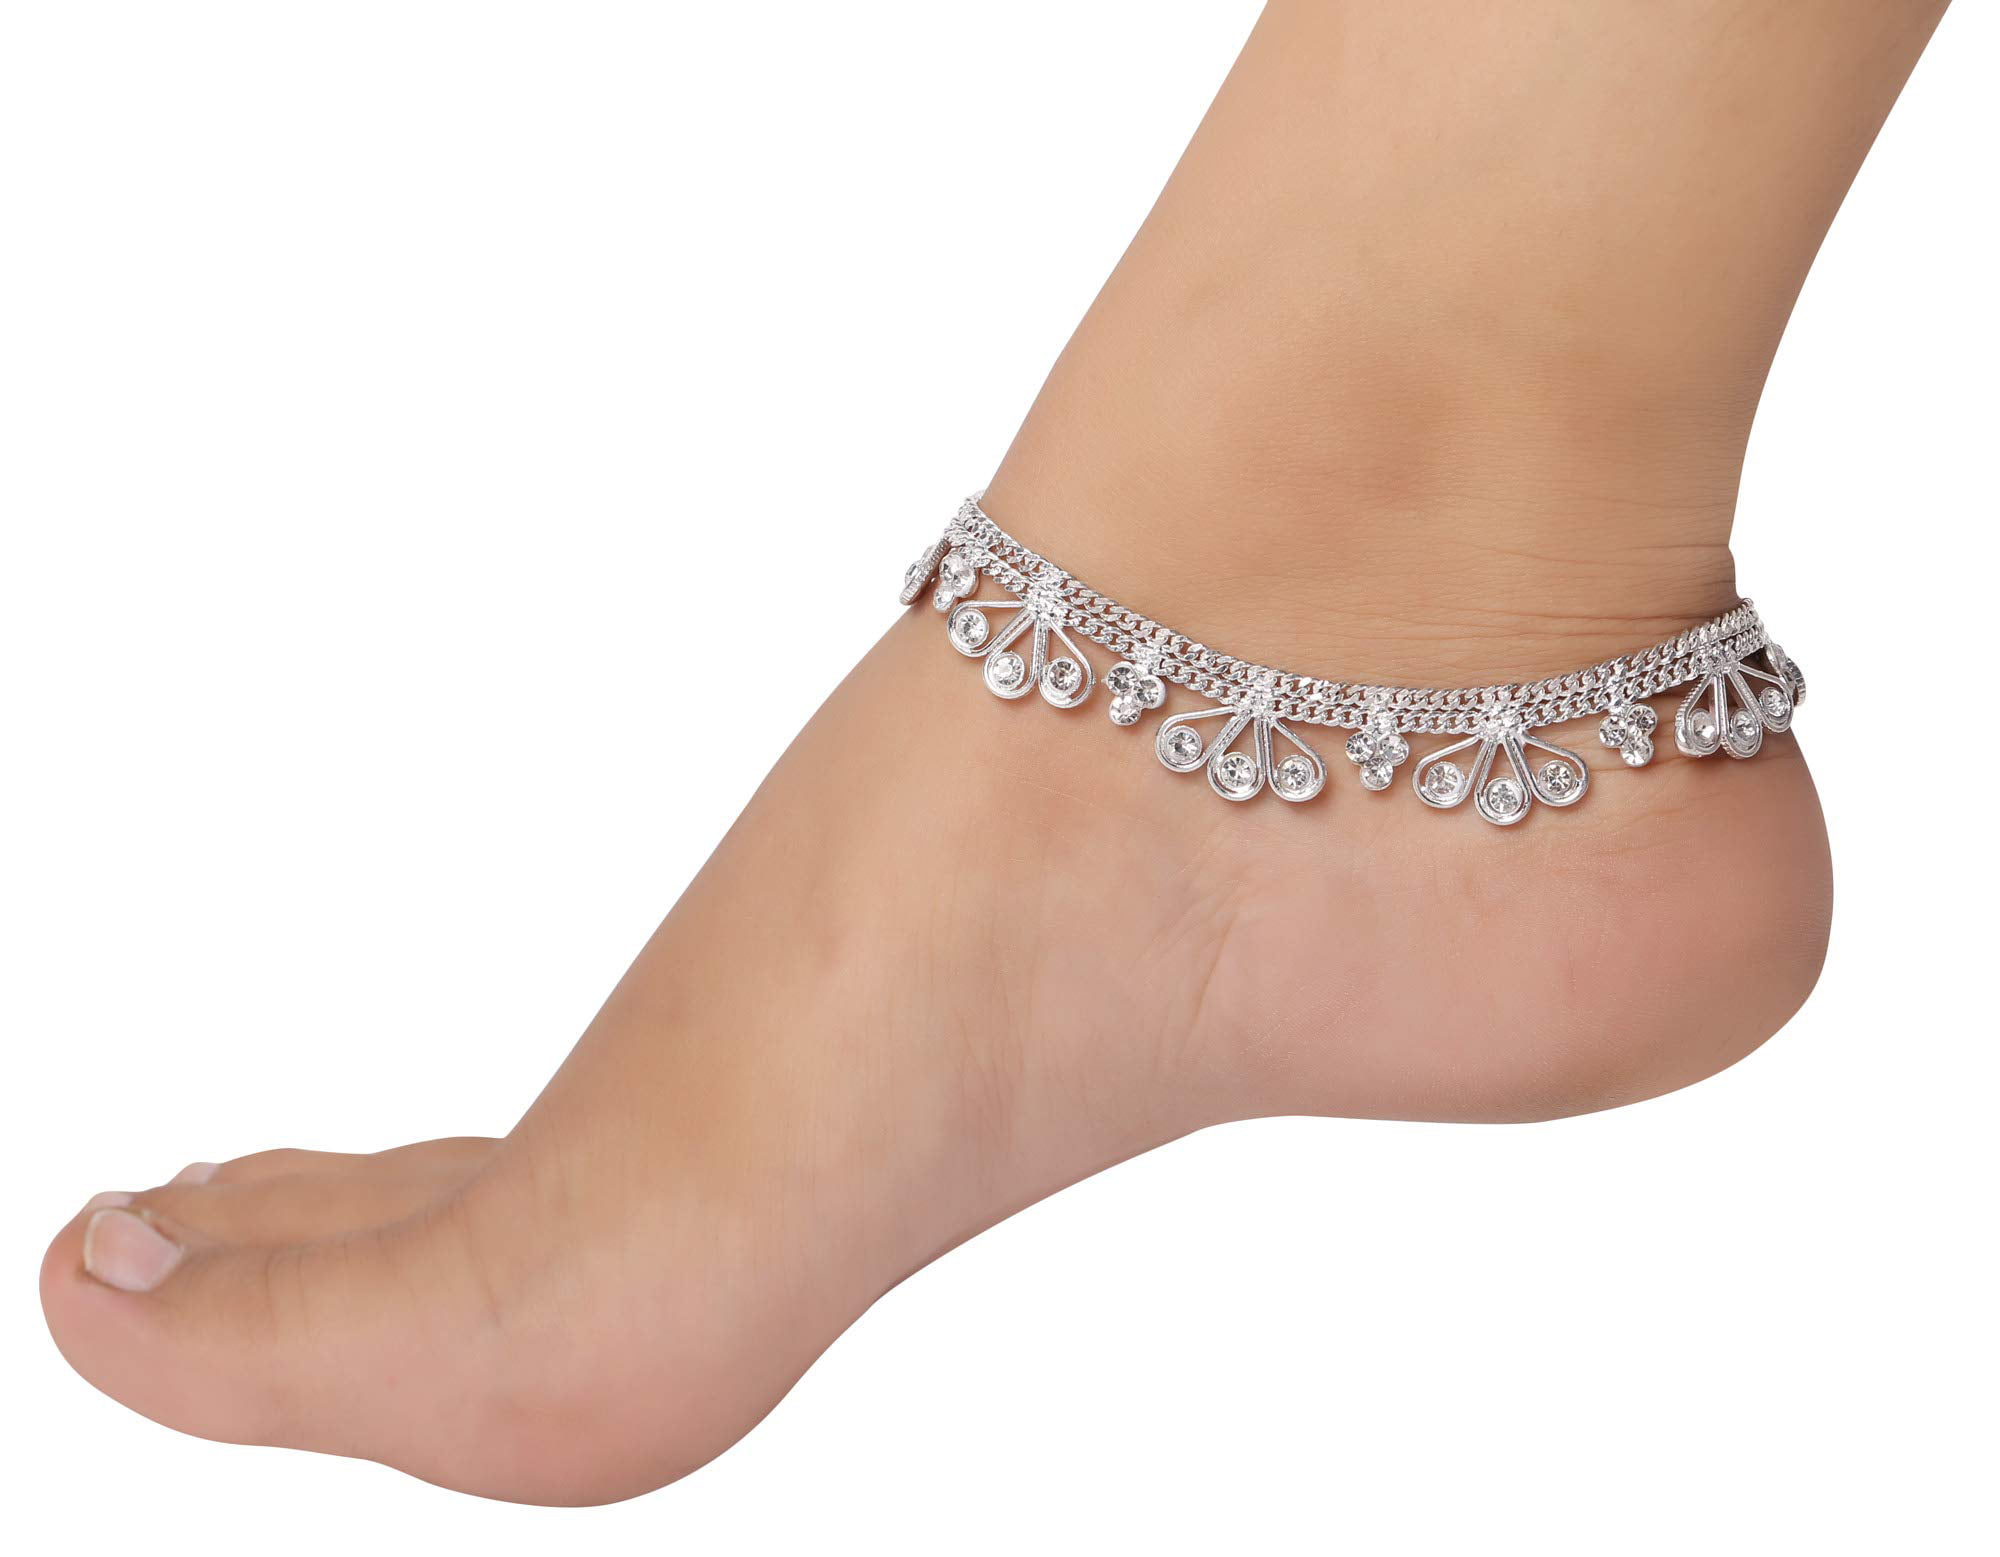 Girls Indian Ethnic Anklet Payal Pair Jewelry Bridal Golden Foot Payal Bracelet Jewellery for Women